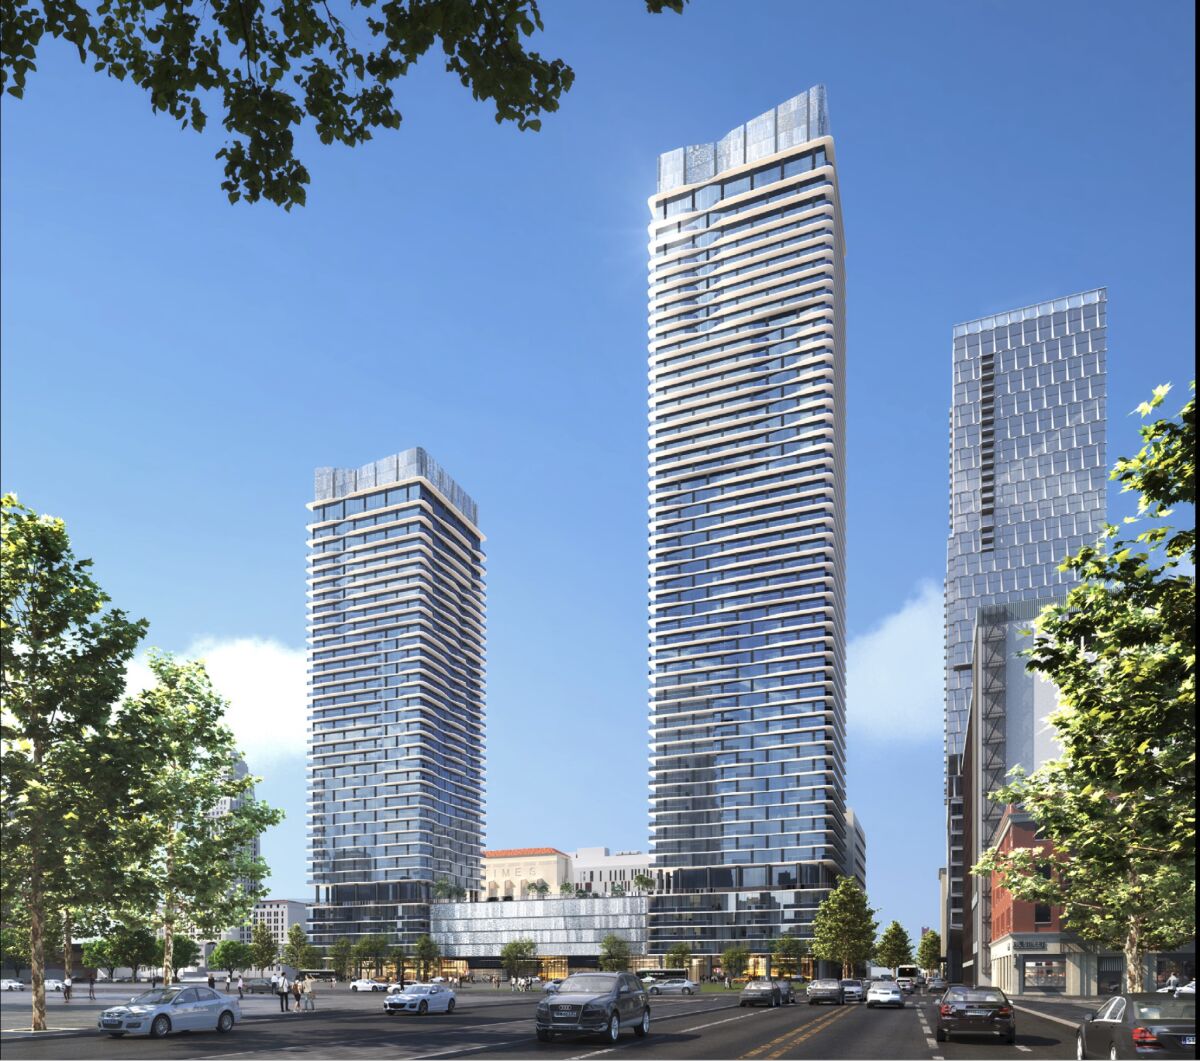 A rendering of two high-rise towers at the site of the old Los Angeles Times building in downtown L.A.